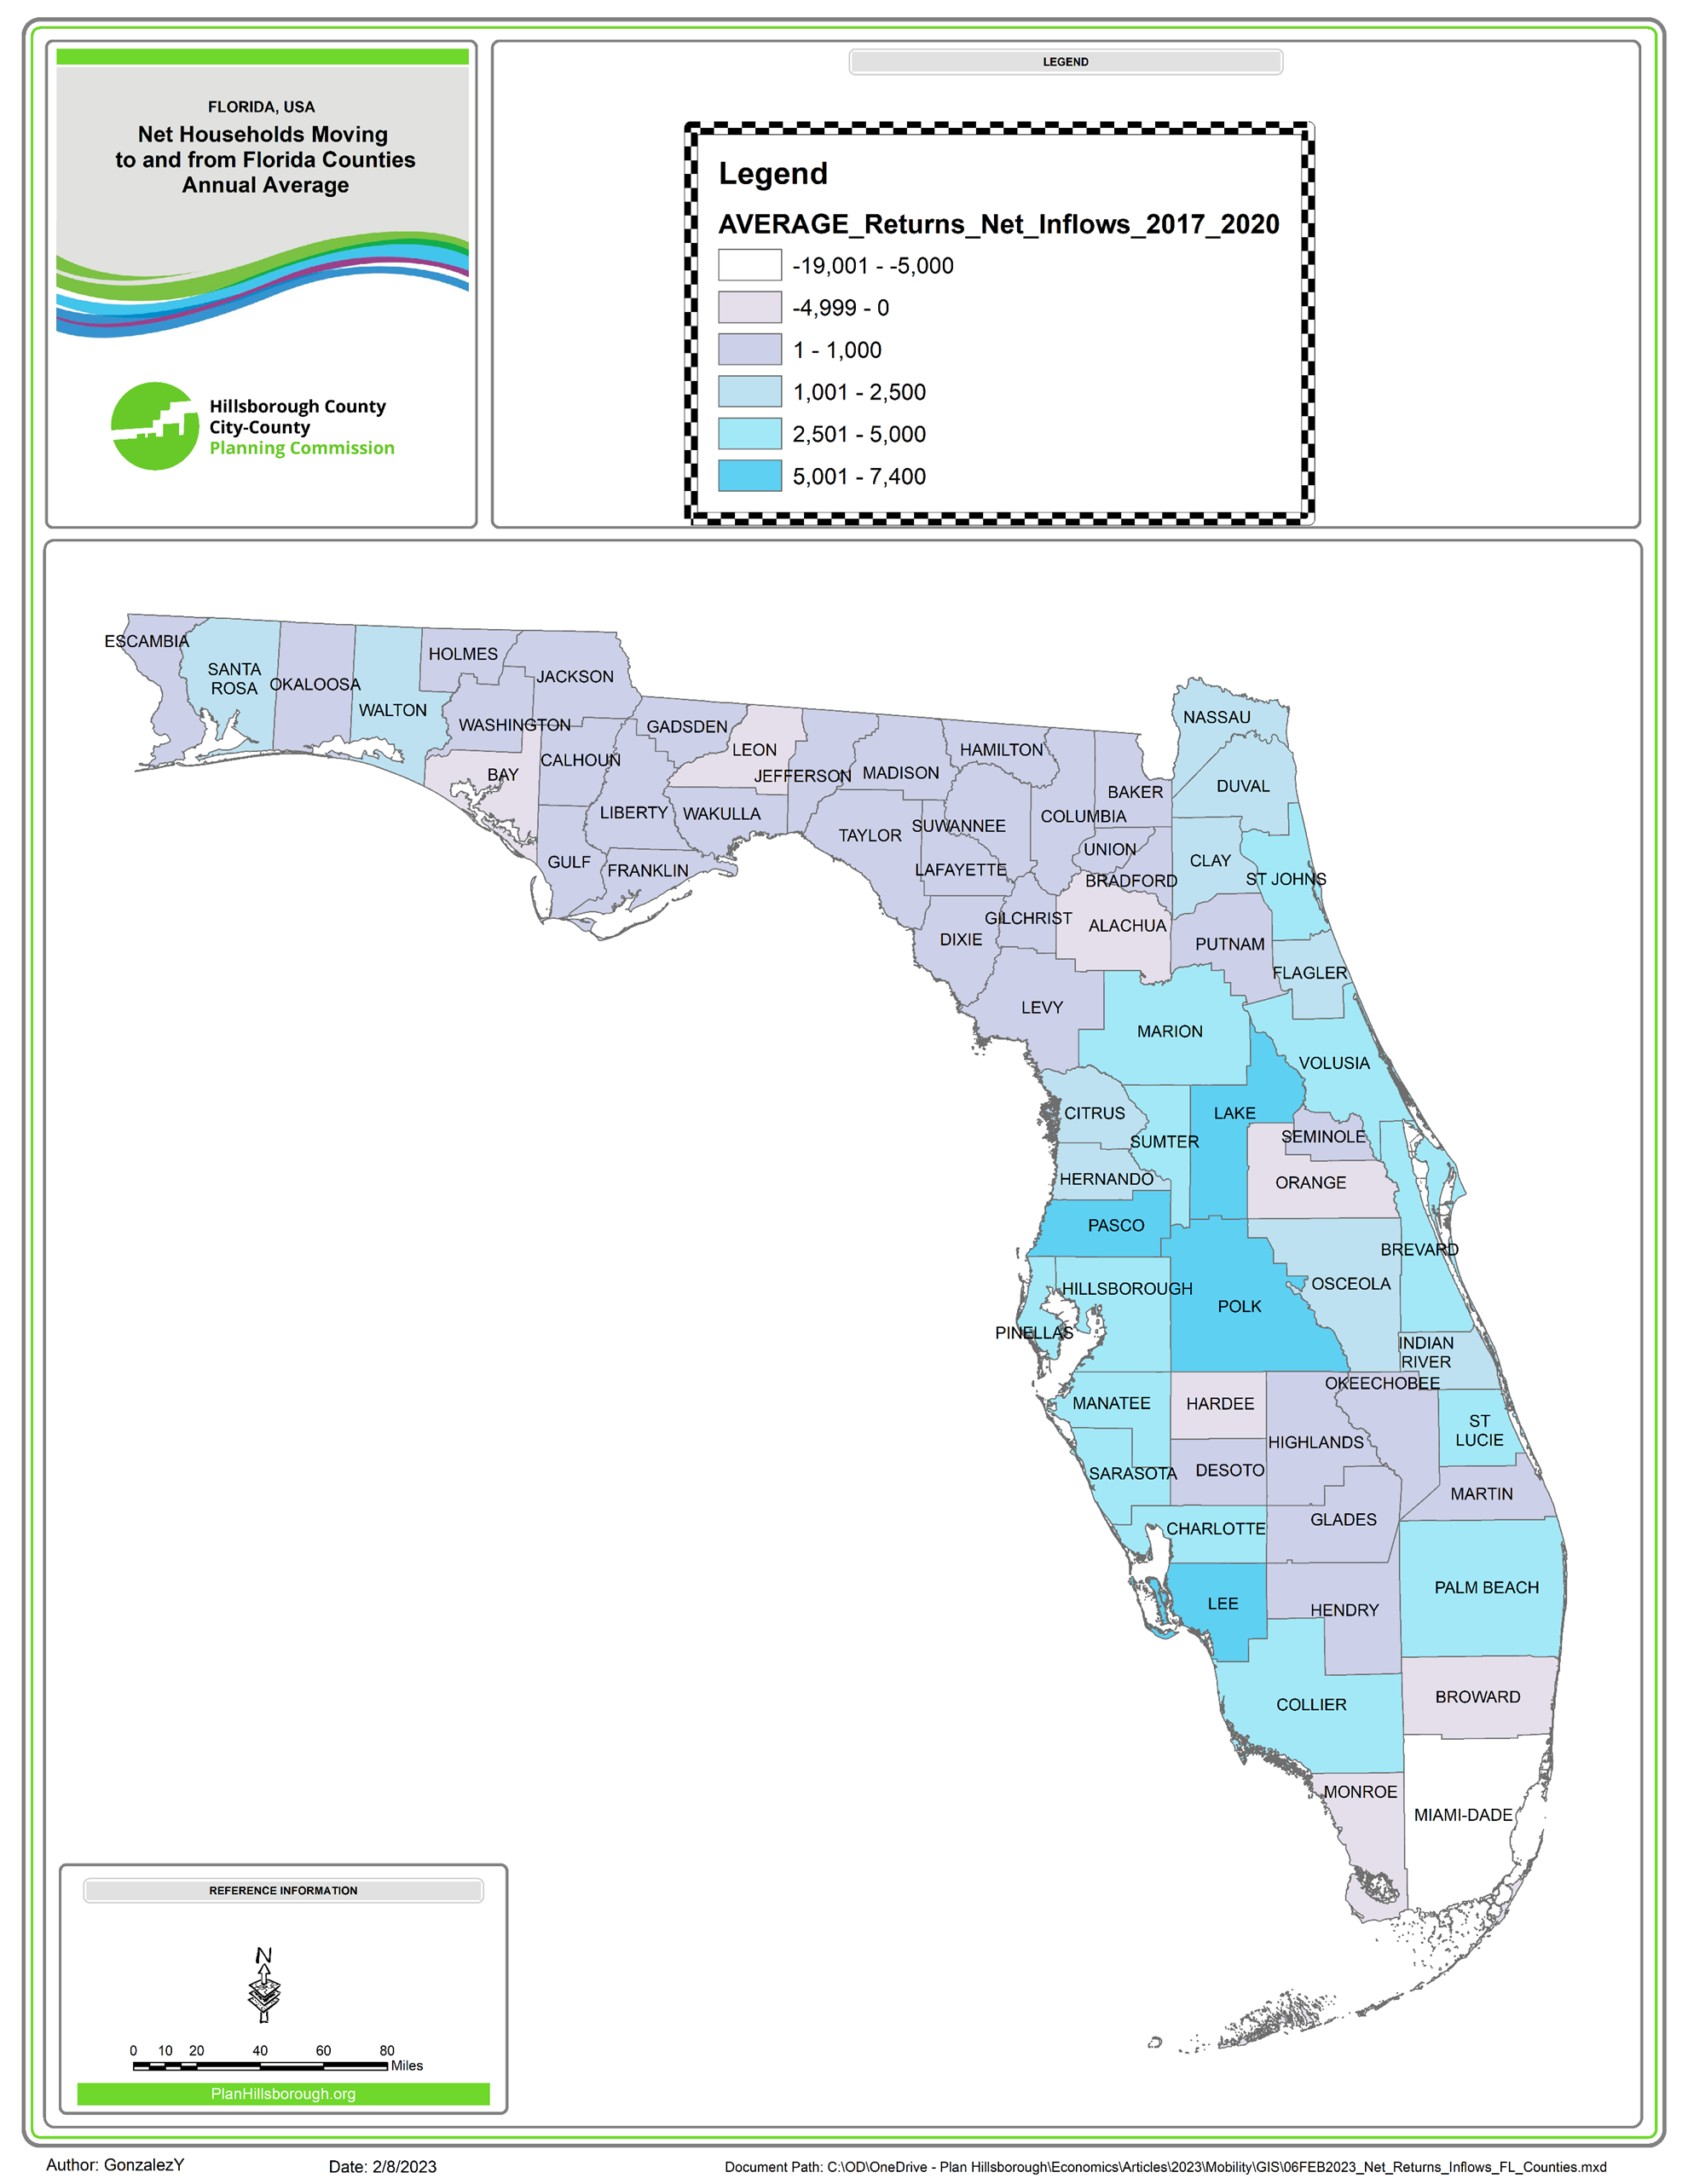 Map shows Florida Counties. Map also shows net new households by county. Pasco and Polk receive over 5,000 net new households per year.